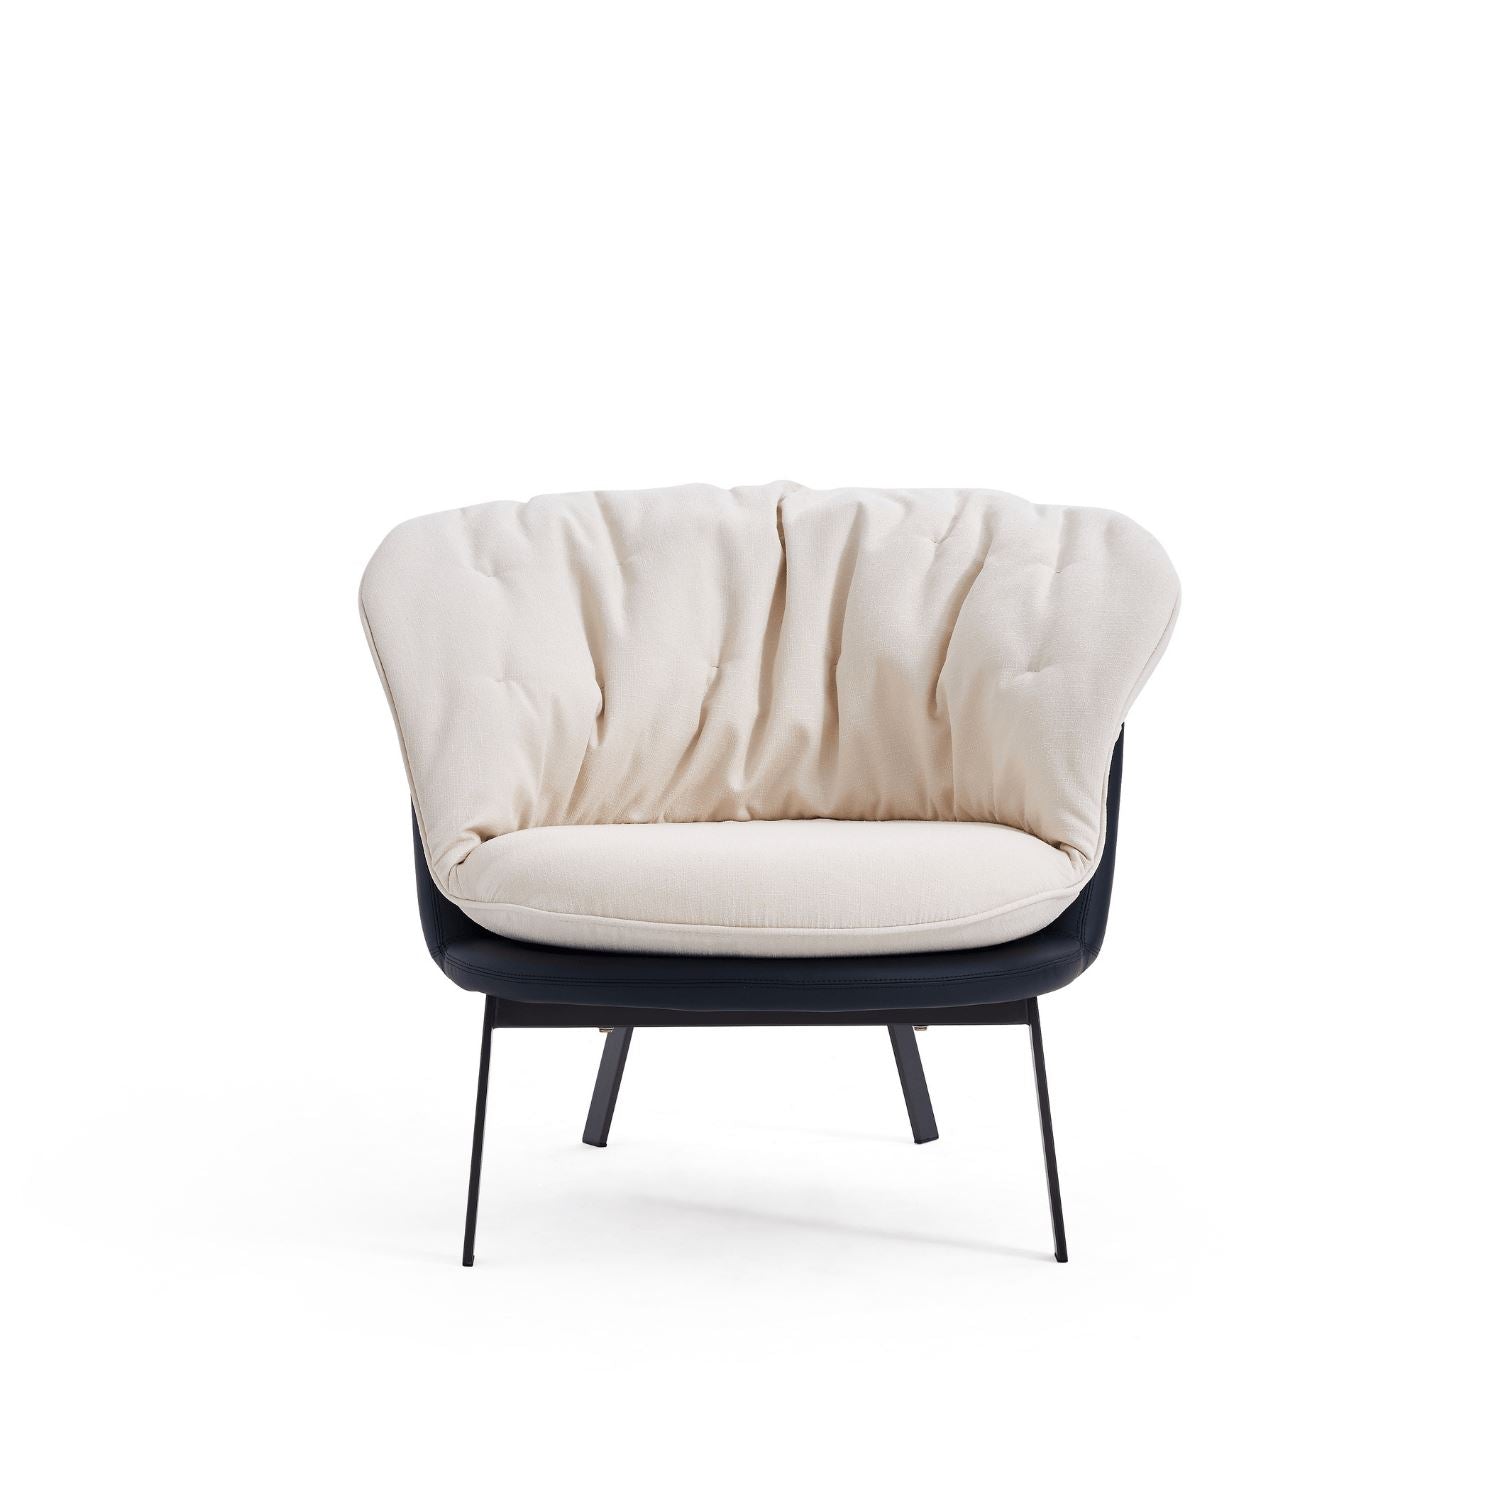 Valwazz Accent Chair - Valyou 